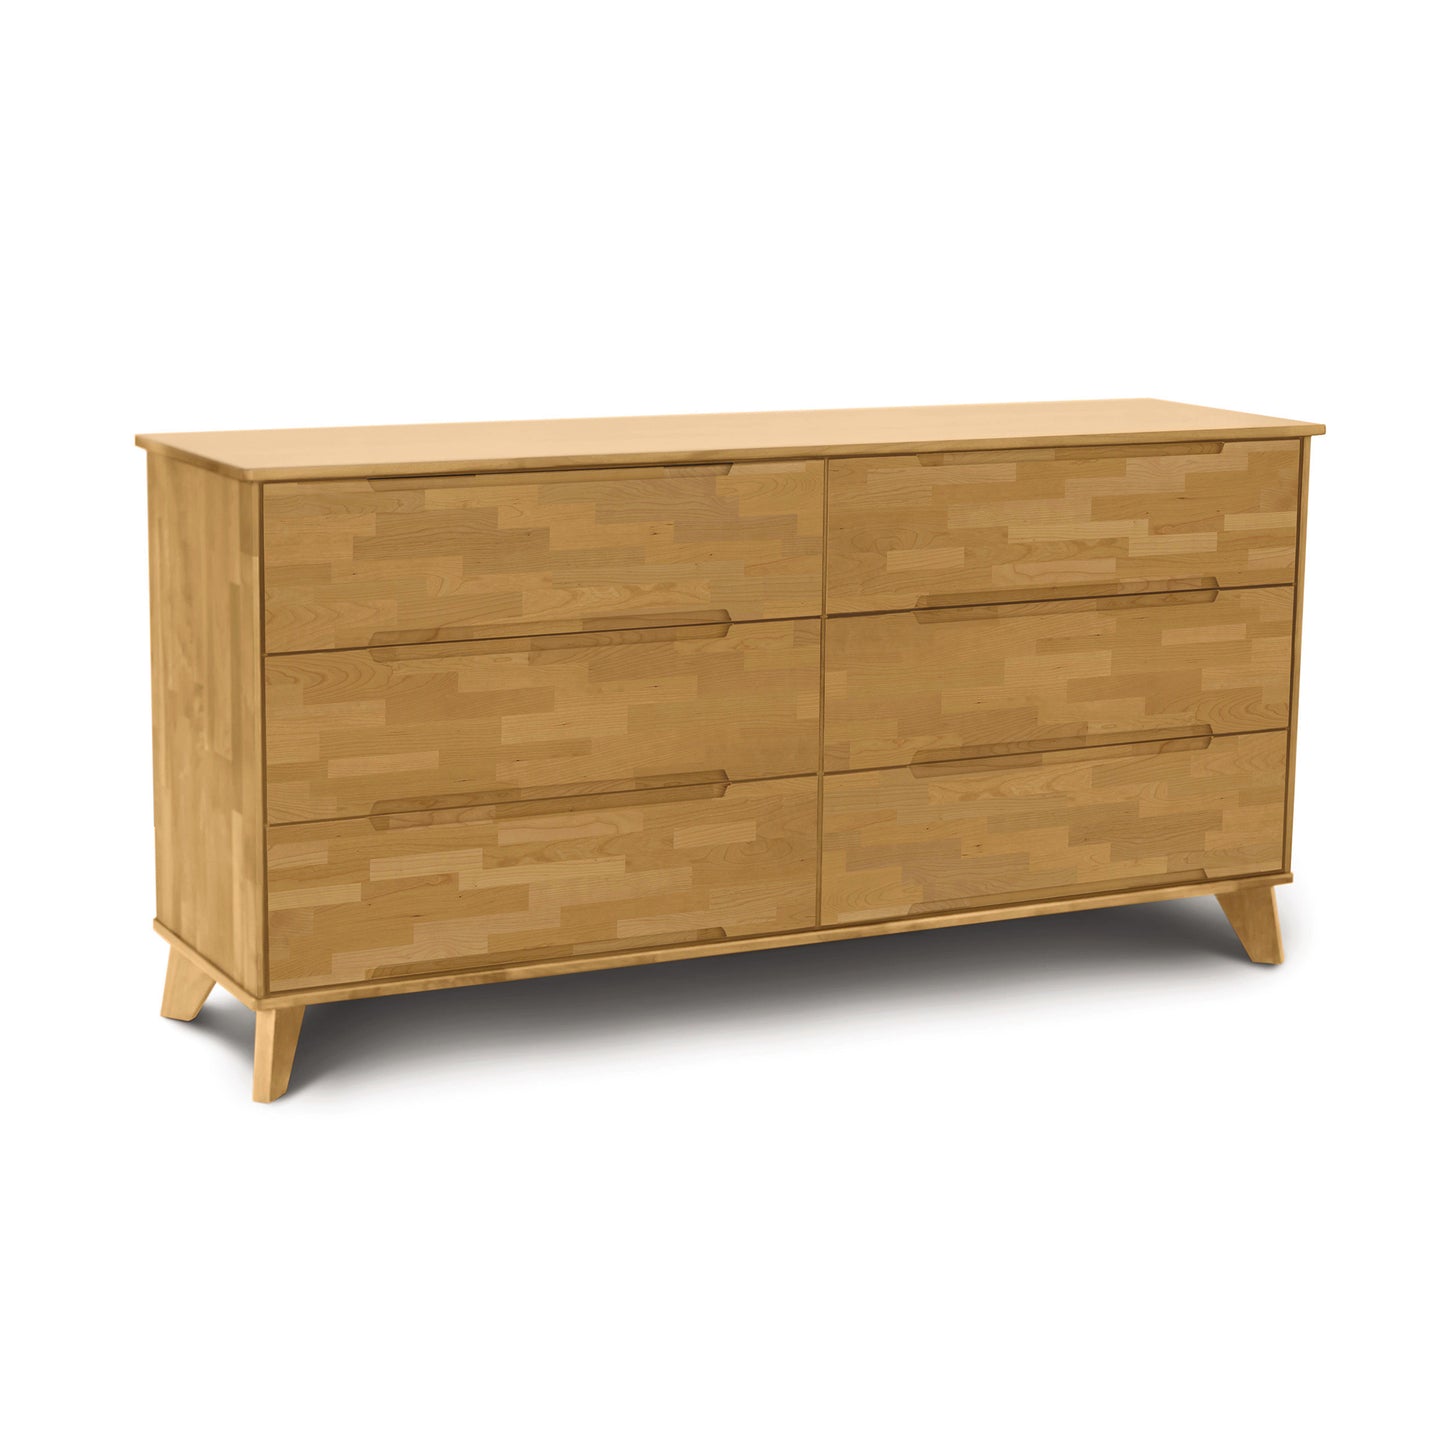 A sustainable innovation, Copeland Furniture's Linn 6-Drawer Dresser made of solid wood with drawers on a white background.